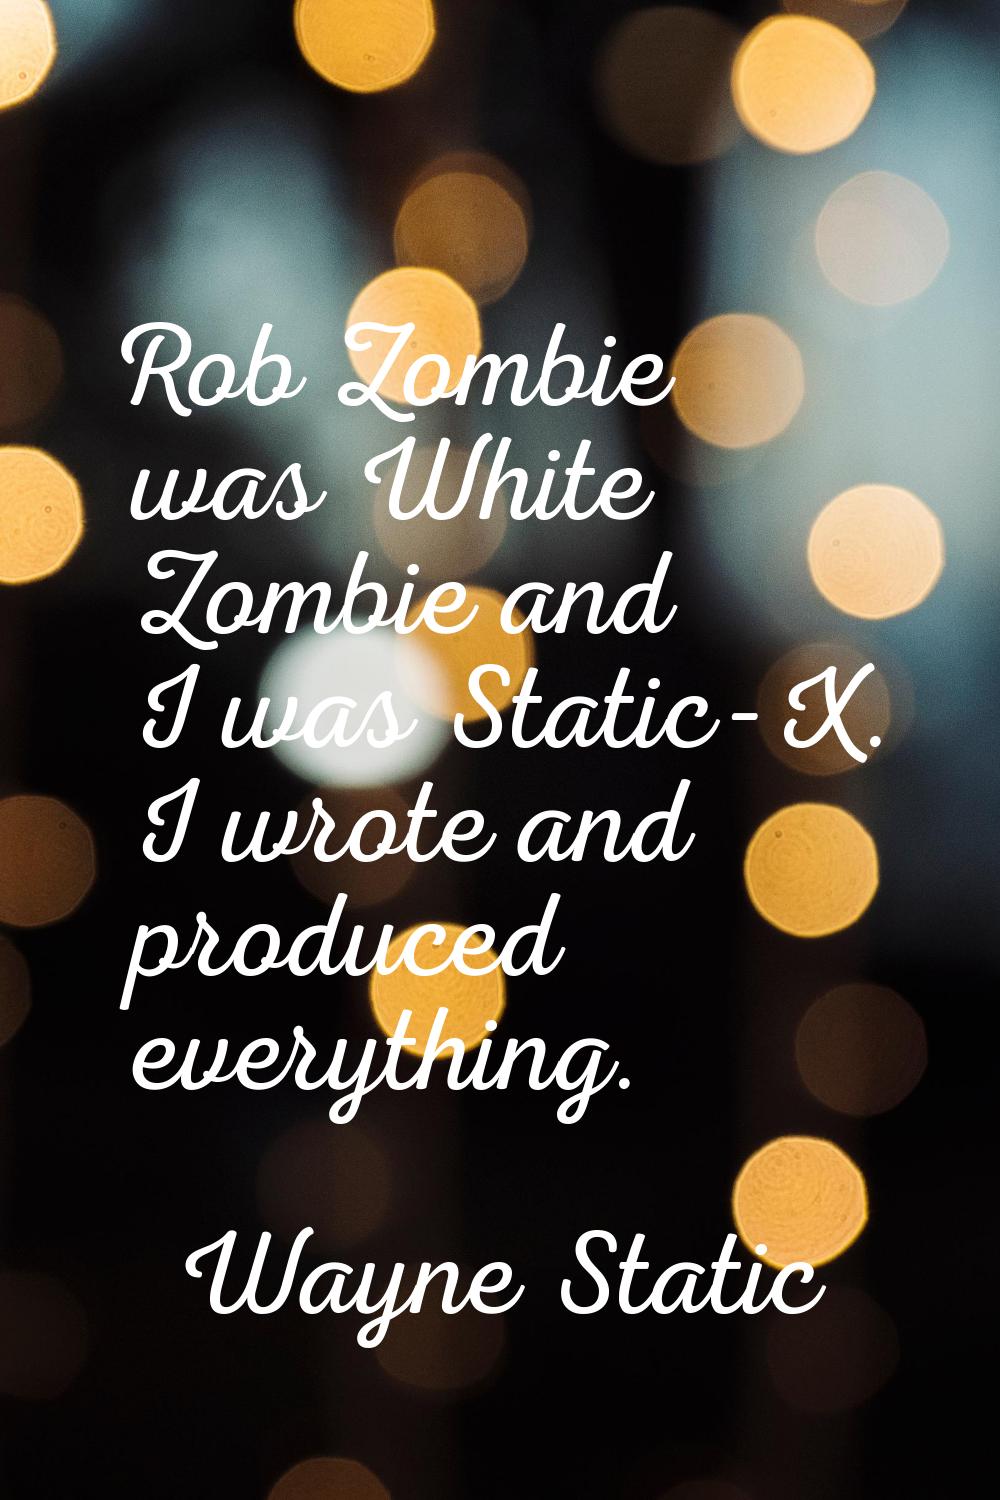 Rob Zombie was White Zombie and I was Static-X. I wrote and produced everything.